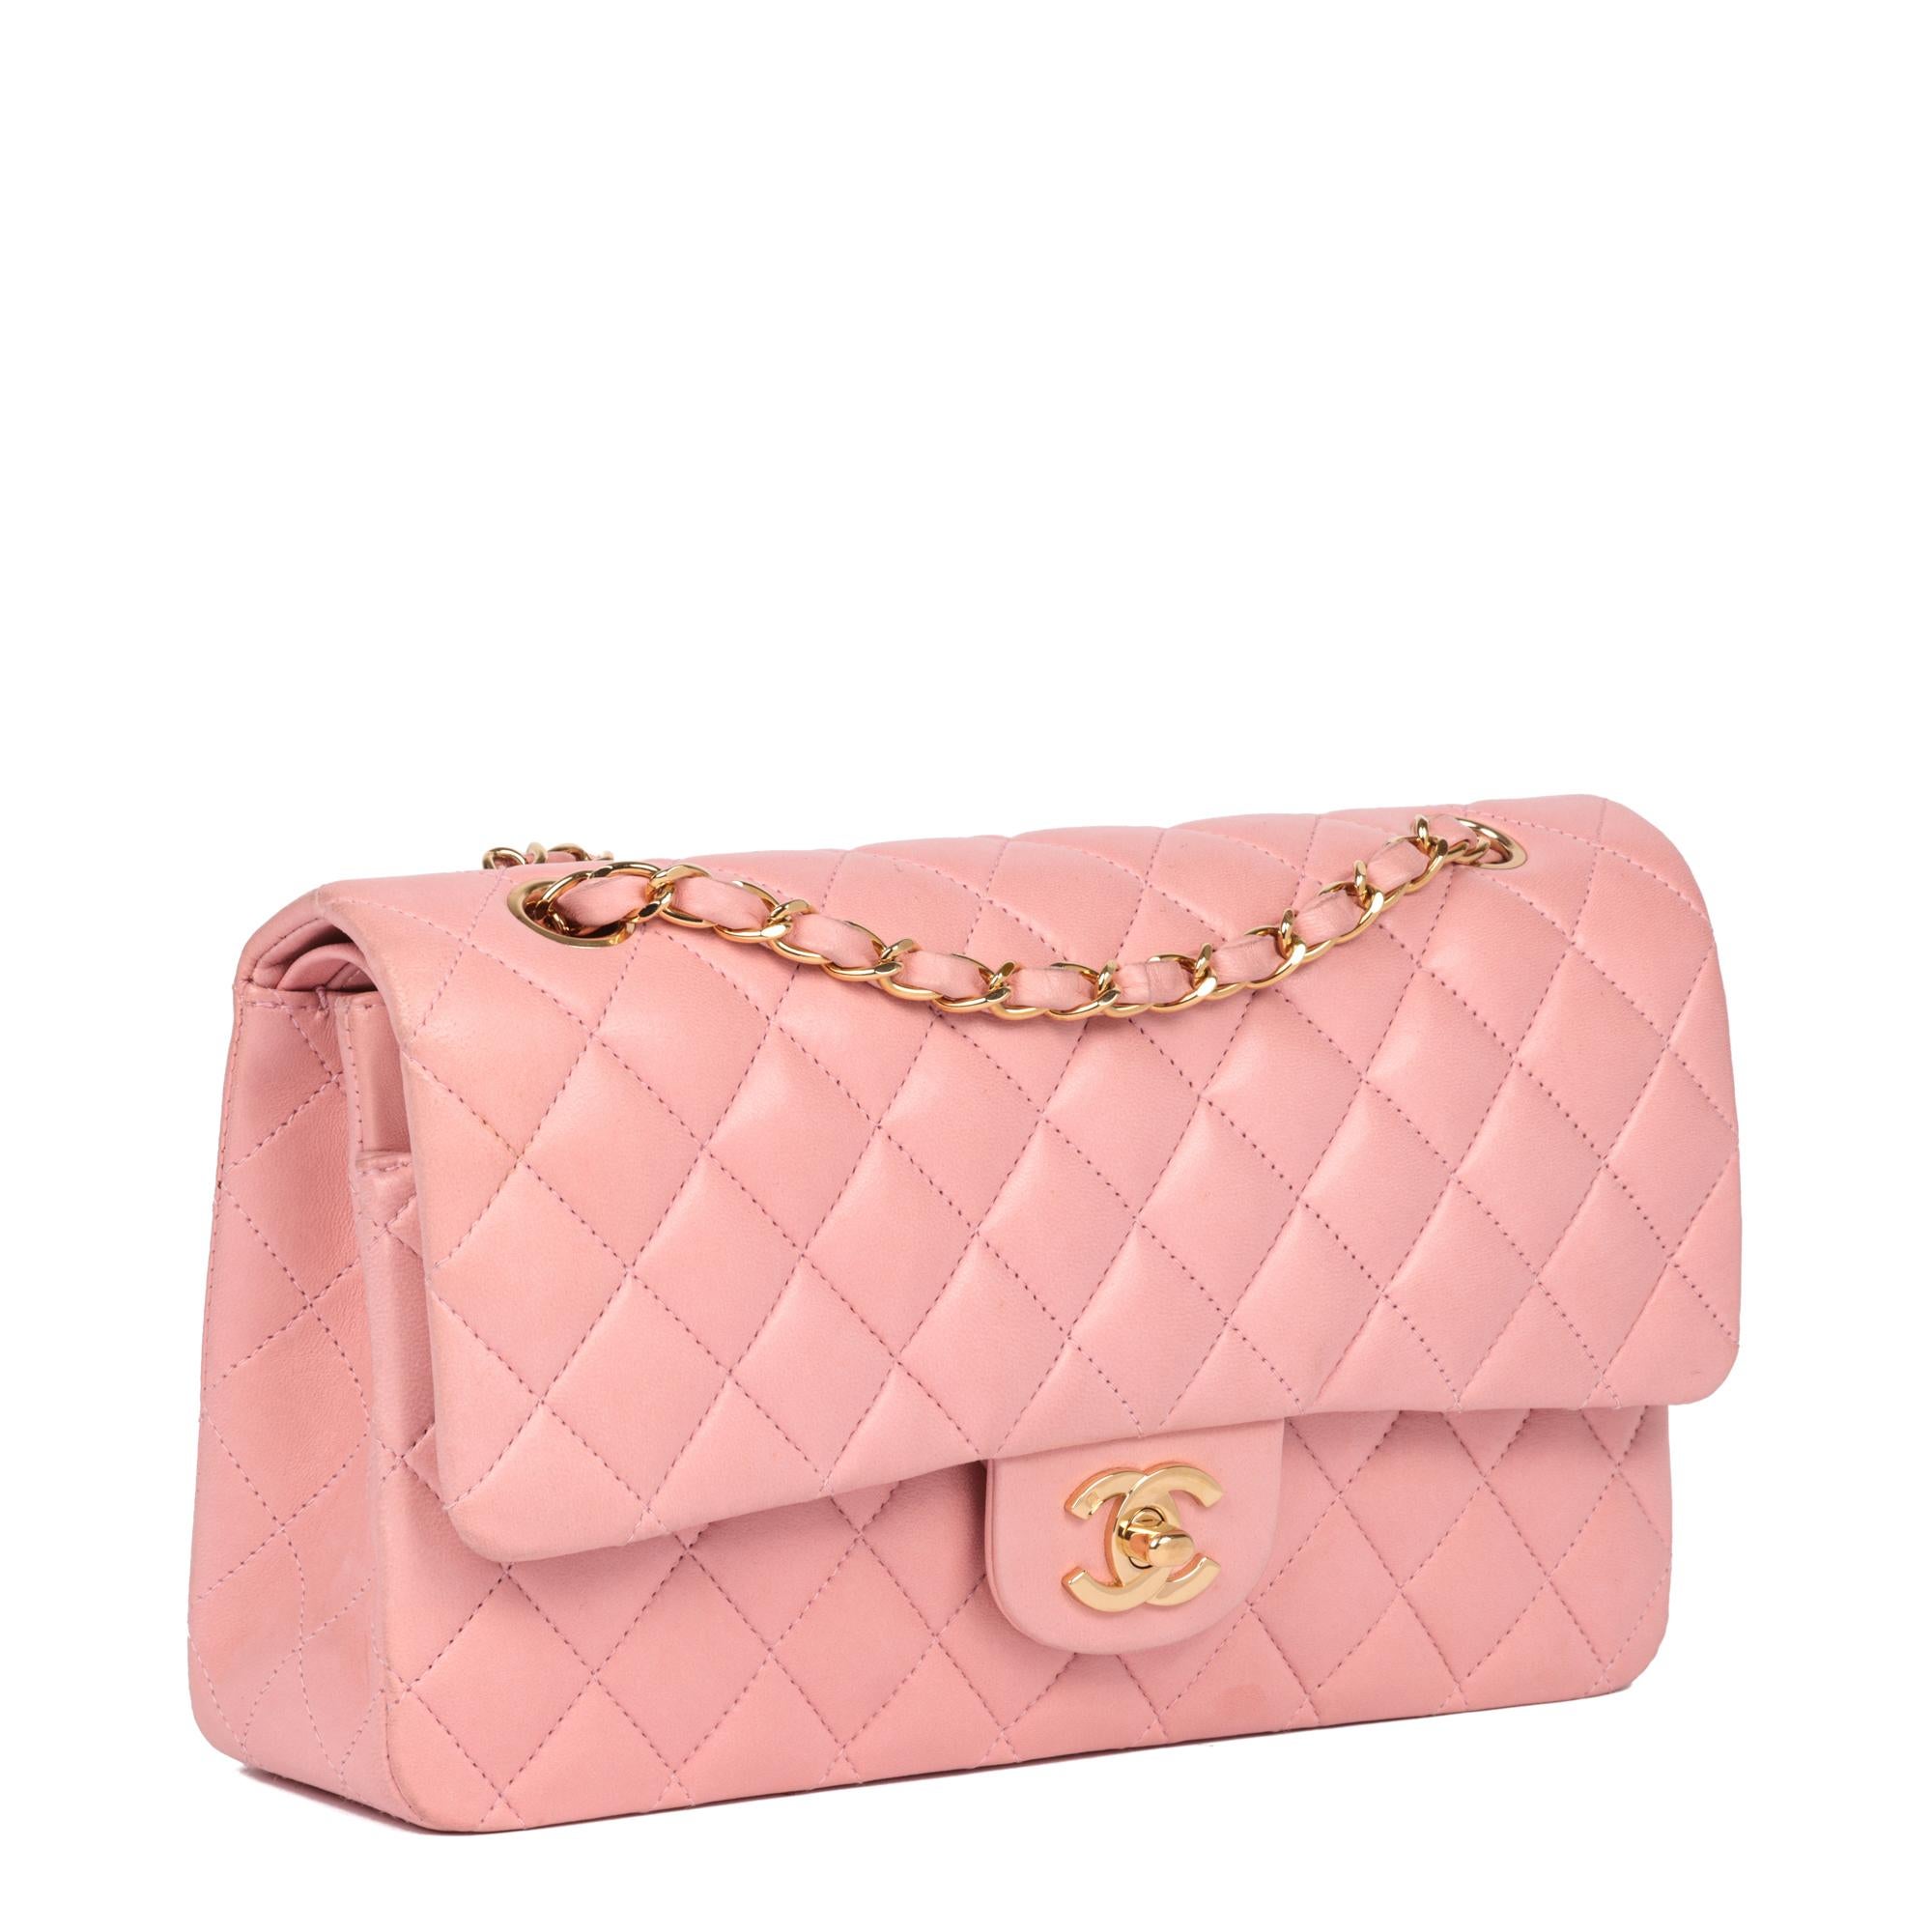 CHANEL
Pink Quilted Lambskin Medium Classic Double Flap Bag

Xupes Reference: HB5129
Serial Number: 8479047
Age (Circa): 2004
Accompanied By: Chanel Dust Bag, Authenticity Card
Authenticity Details: Authenticity Card, Serial Sticker (Made in